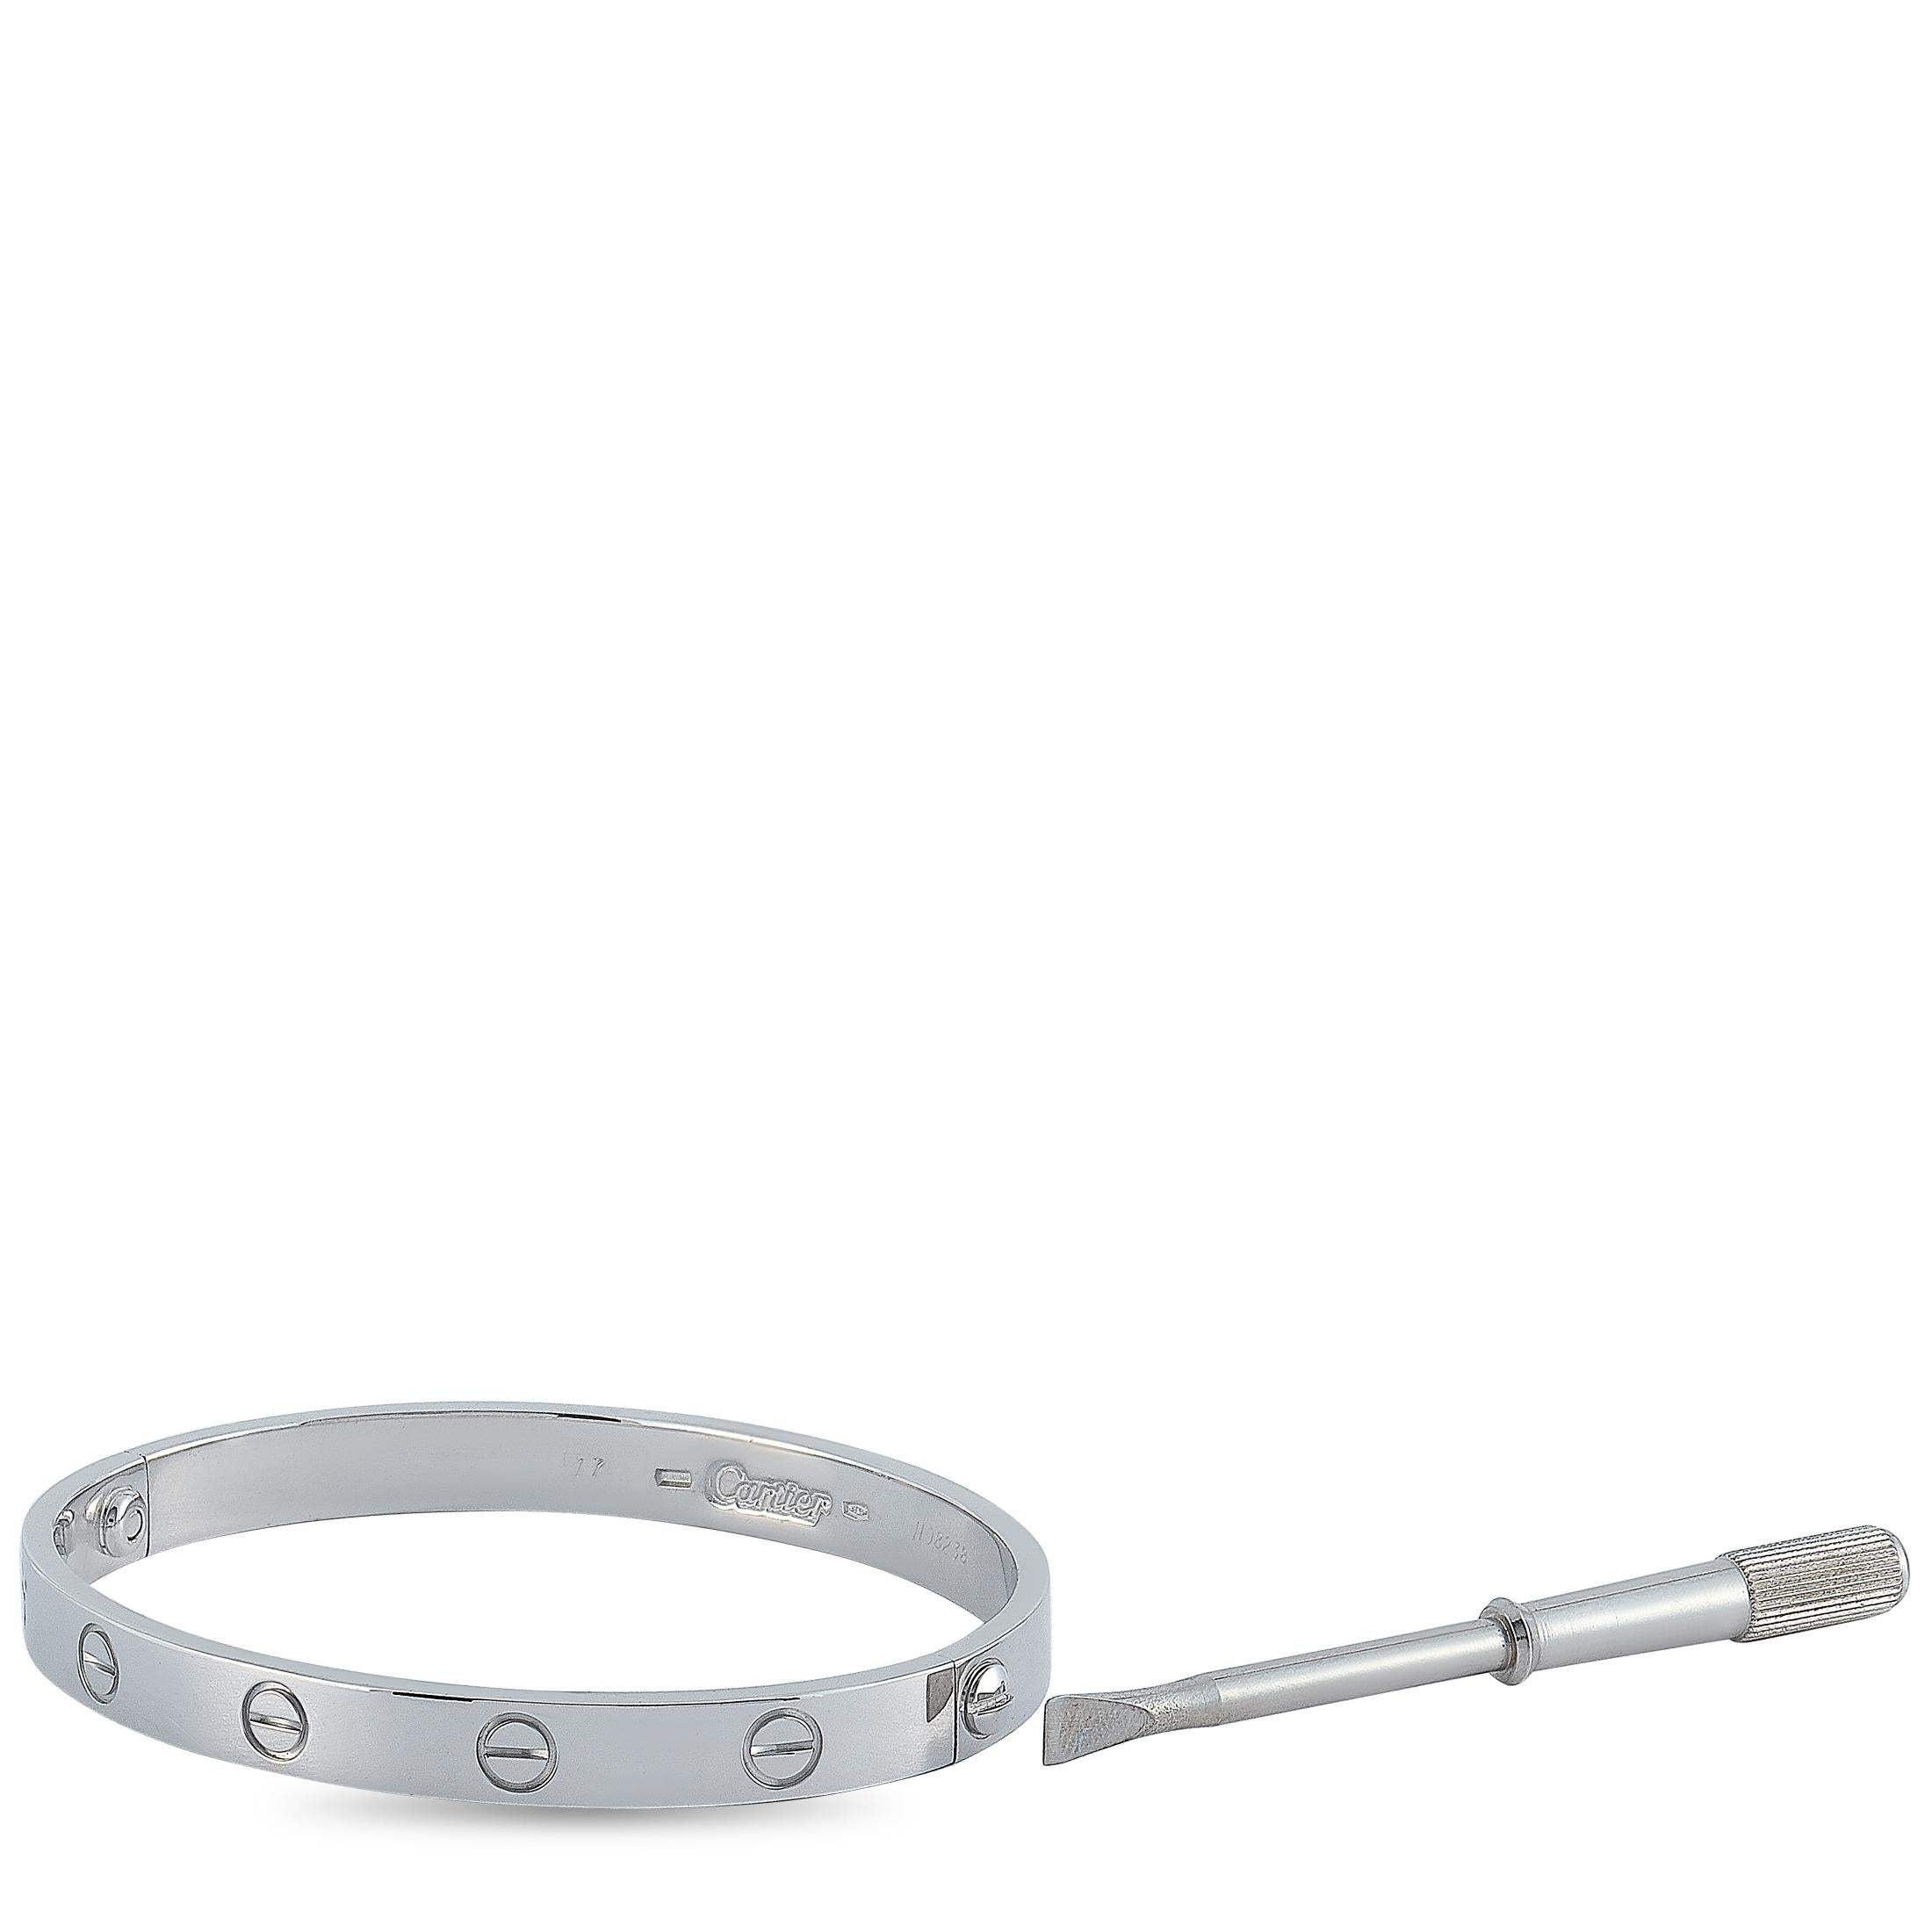 The Cartier “LOVE” bracelet is crafted from 18K white gold and measures 6.65” in length. The bracelet weighs 34 grams and is delivered with a screwdriver.

This jewelry piece is offered in estate condition and includes the manufacturer’s box.